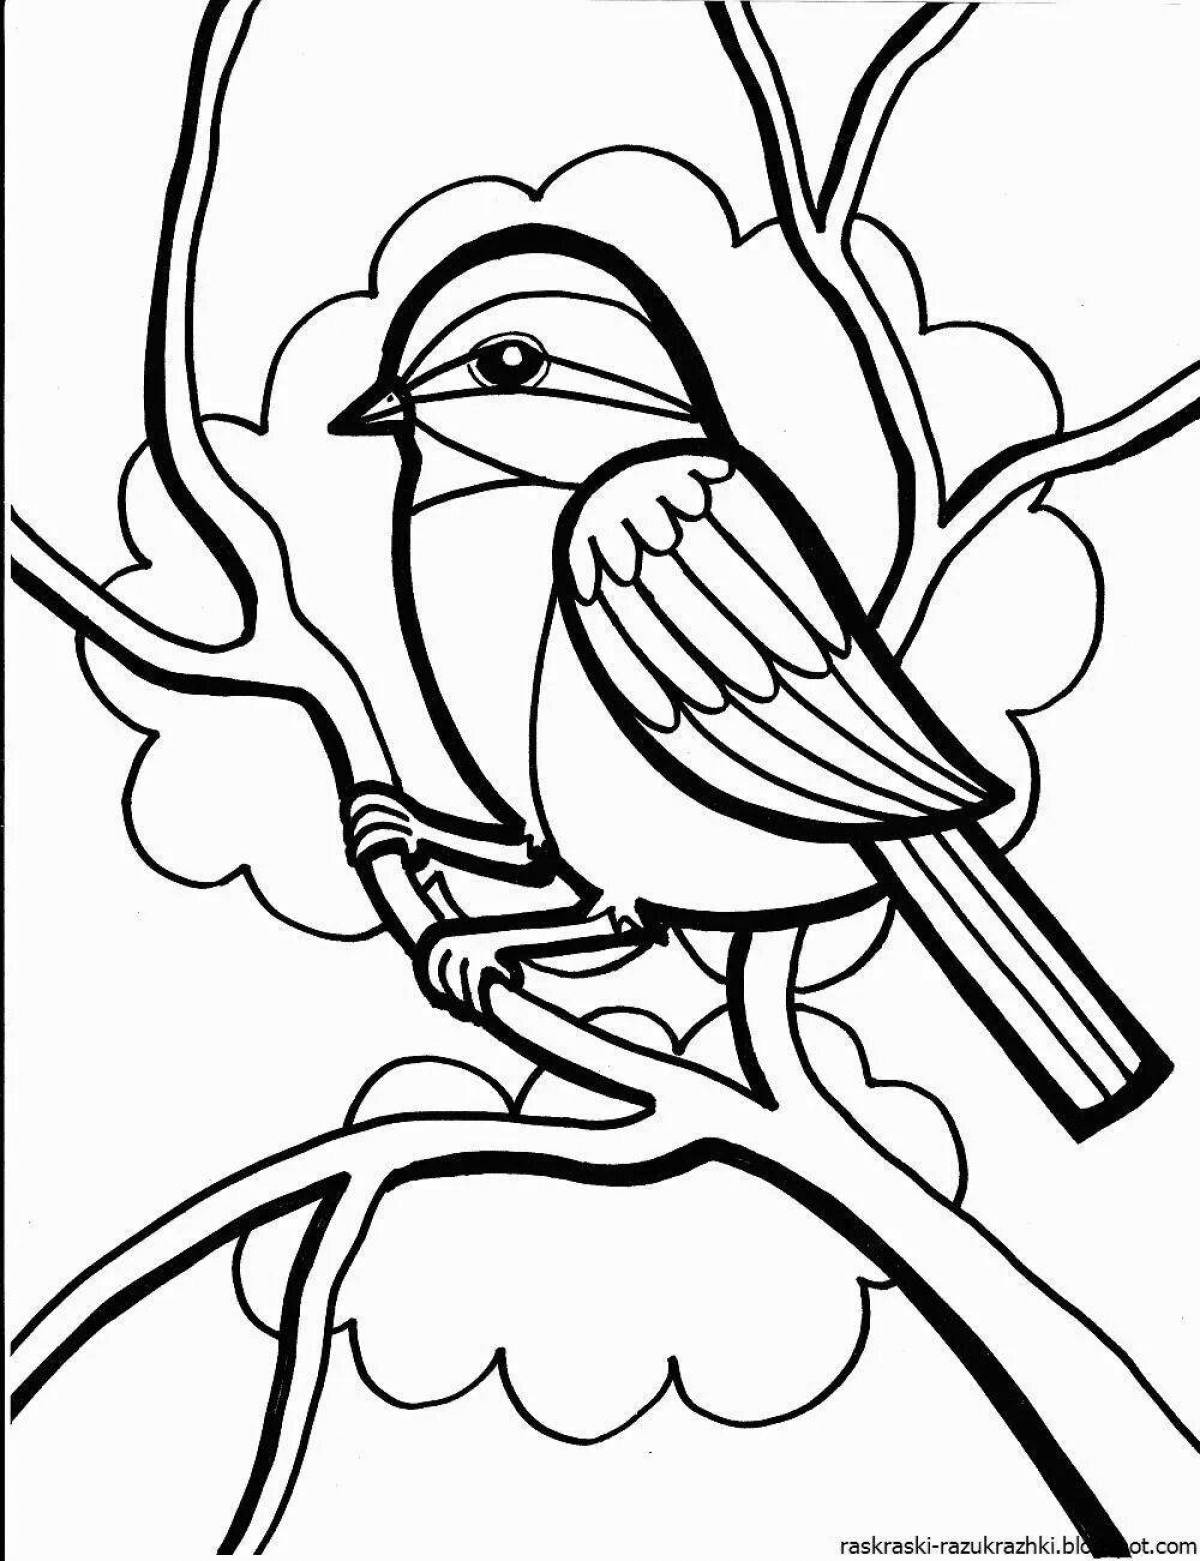 Wonderful bird coloring page for kids